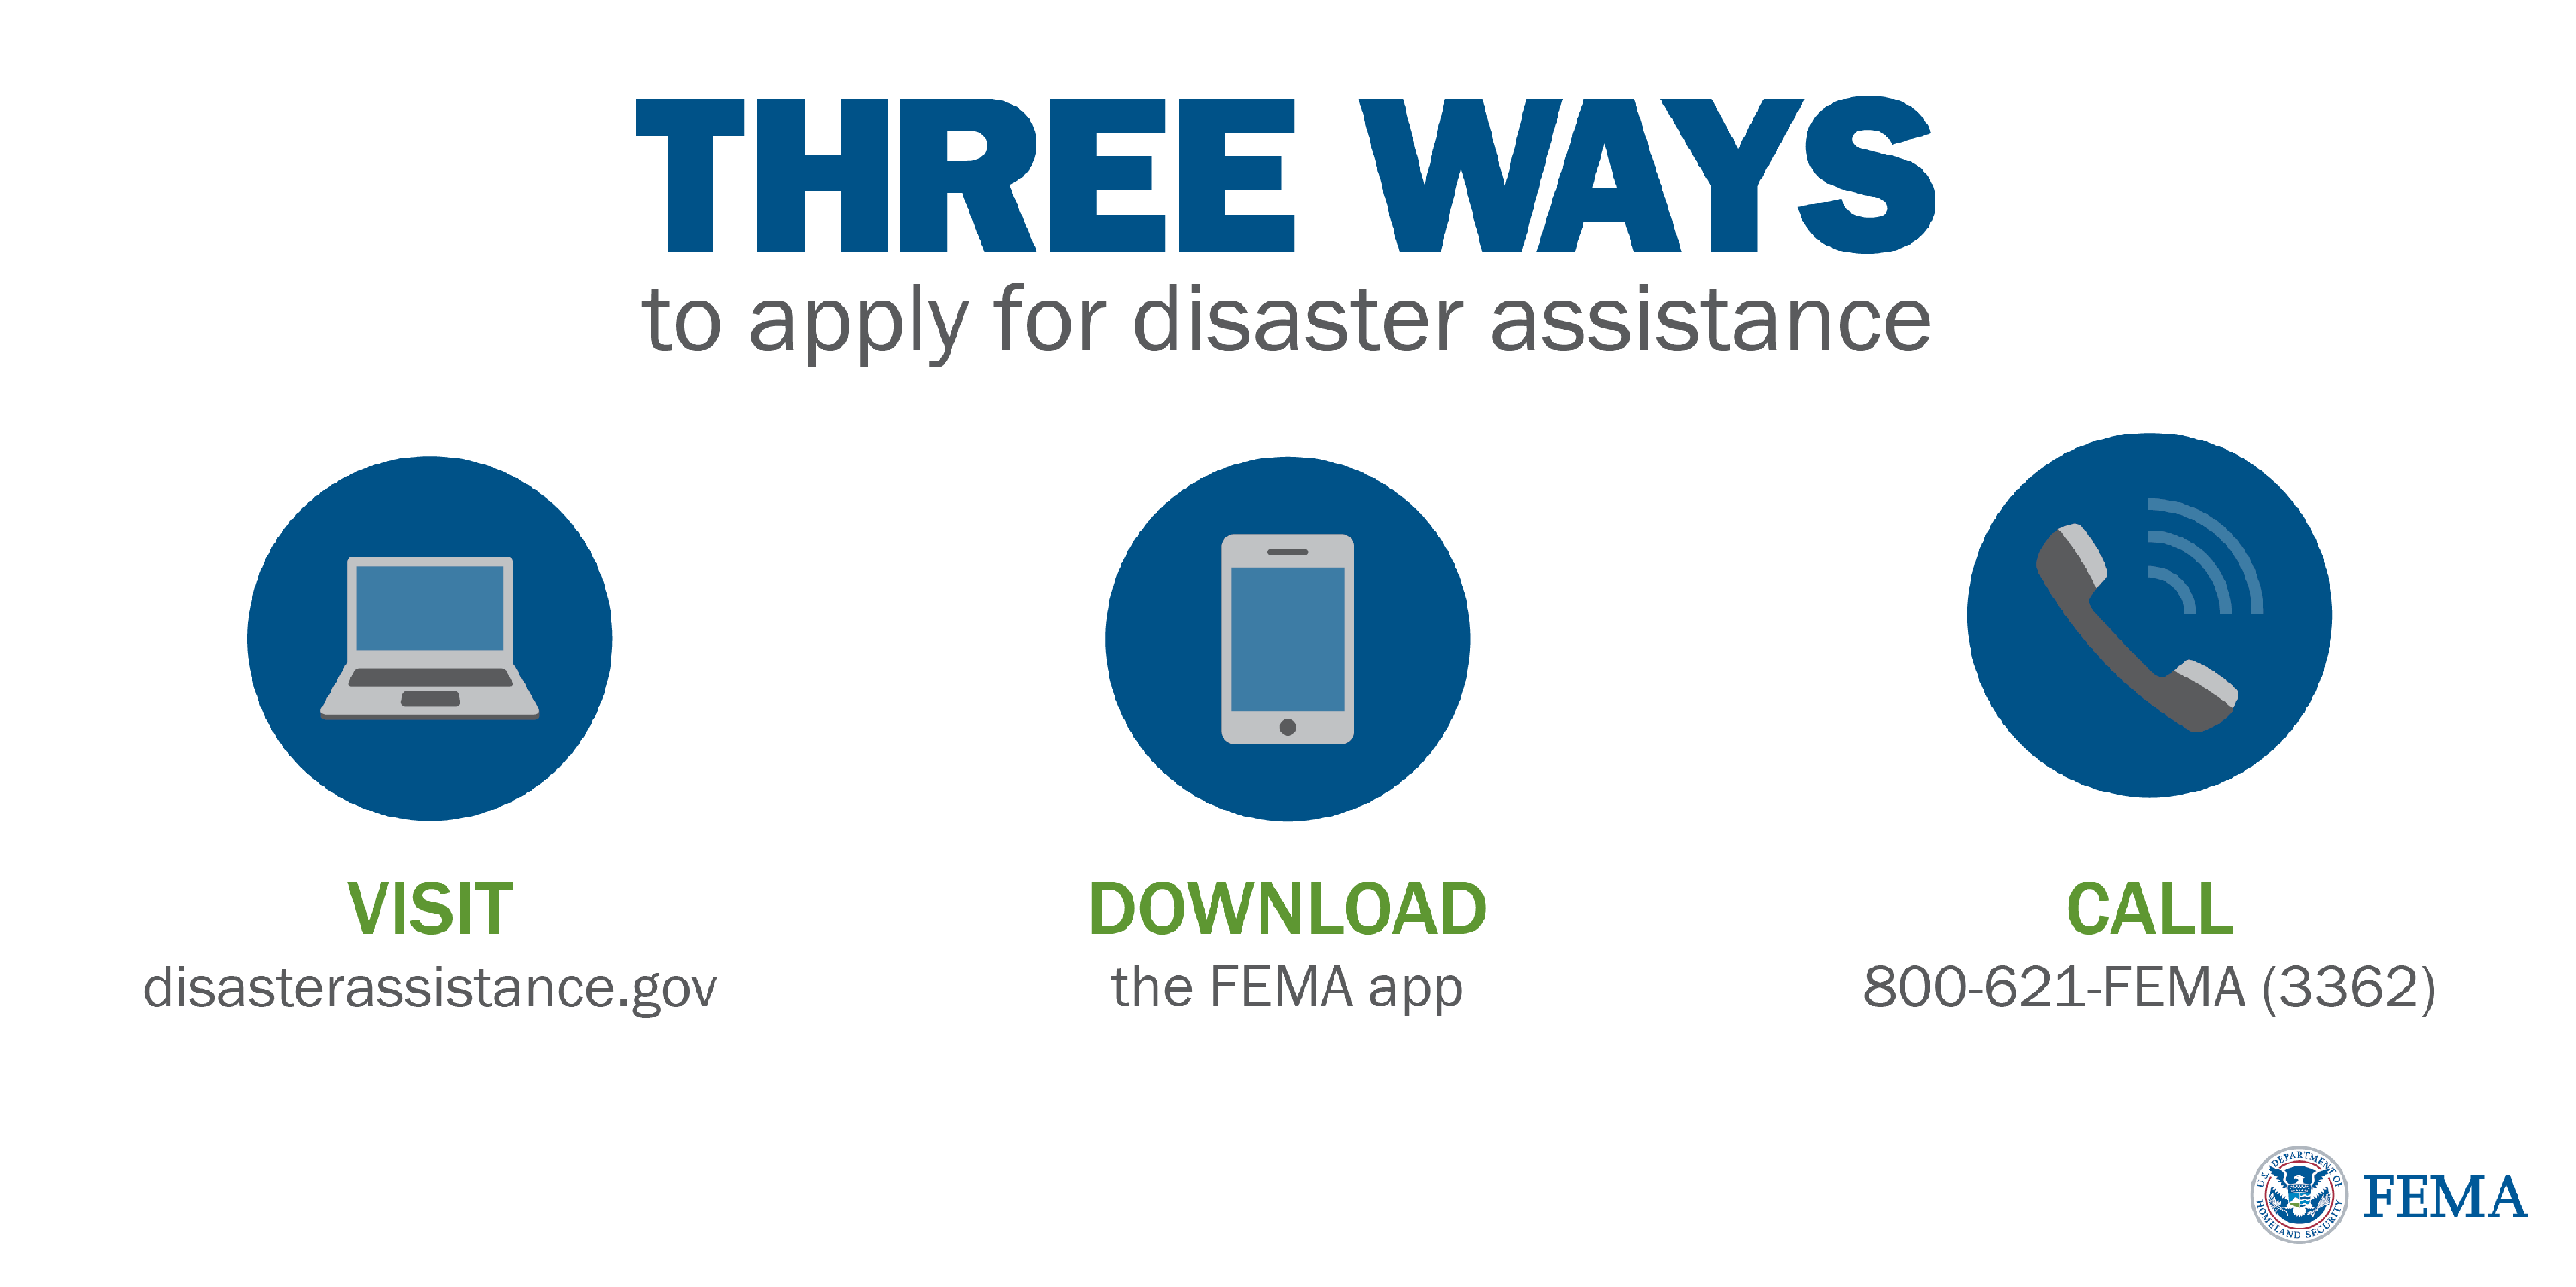 Three ways to apply for assistance - website - disasterassistance.gov, download the FEMA app, call 1-800-621-3362